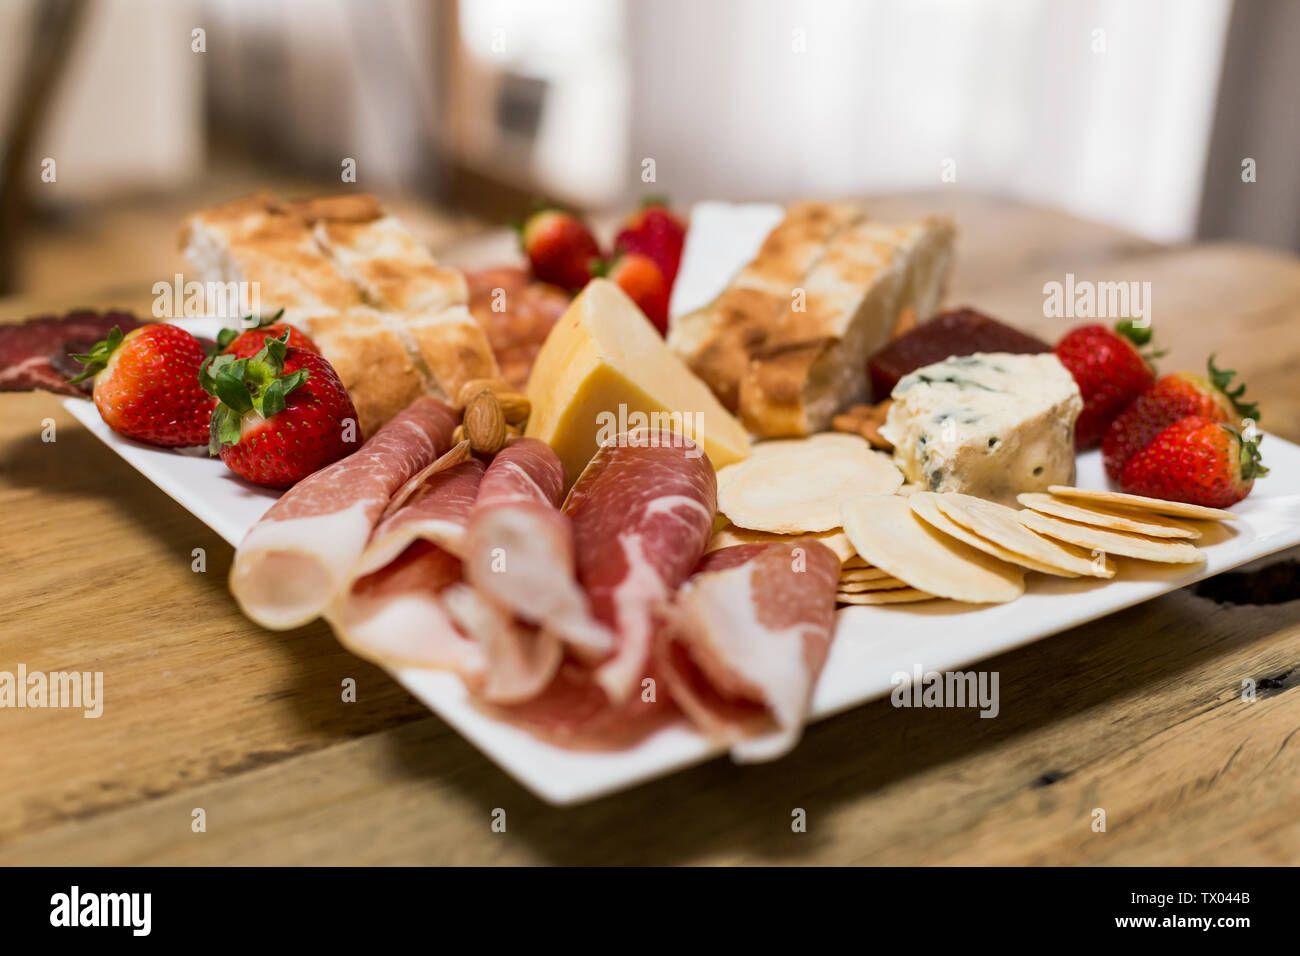 Antipasto platter with a mixture of cold meats, strawberries, cheese, crackers and bread Stock Photo